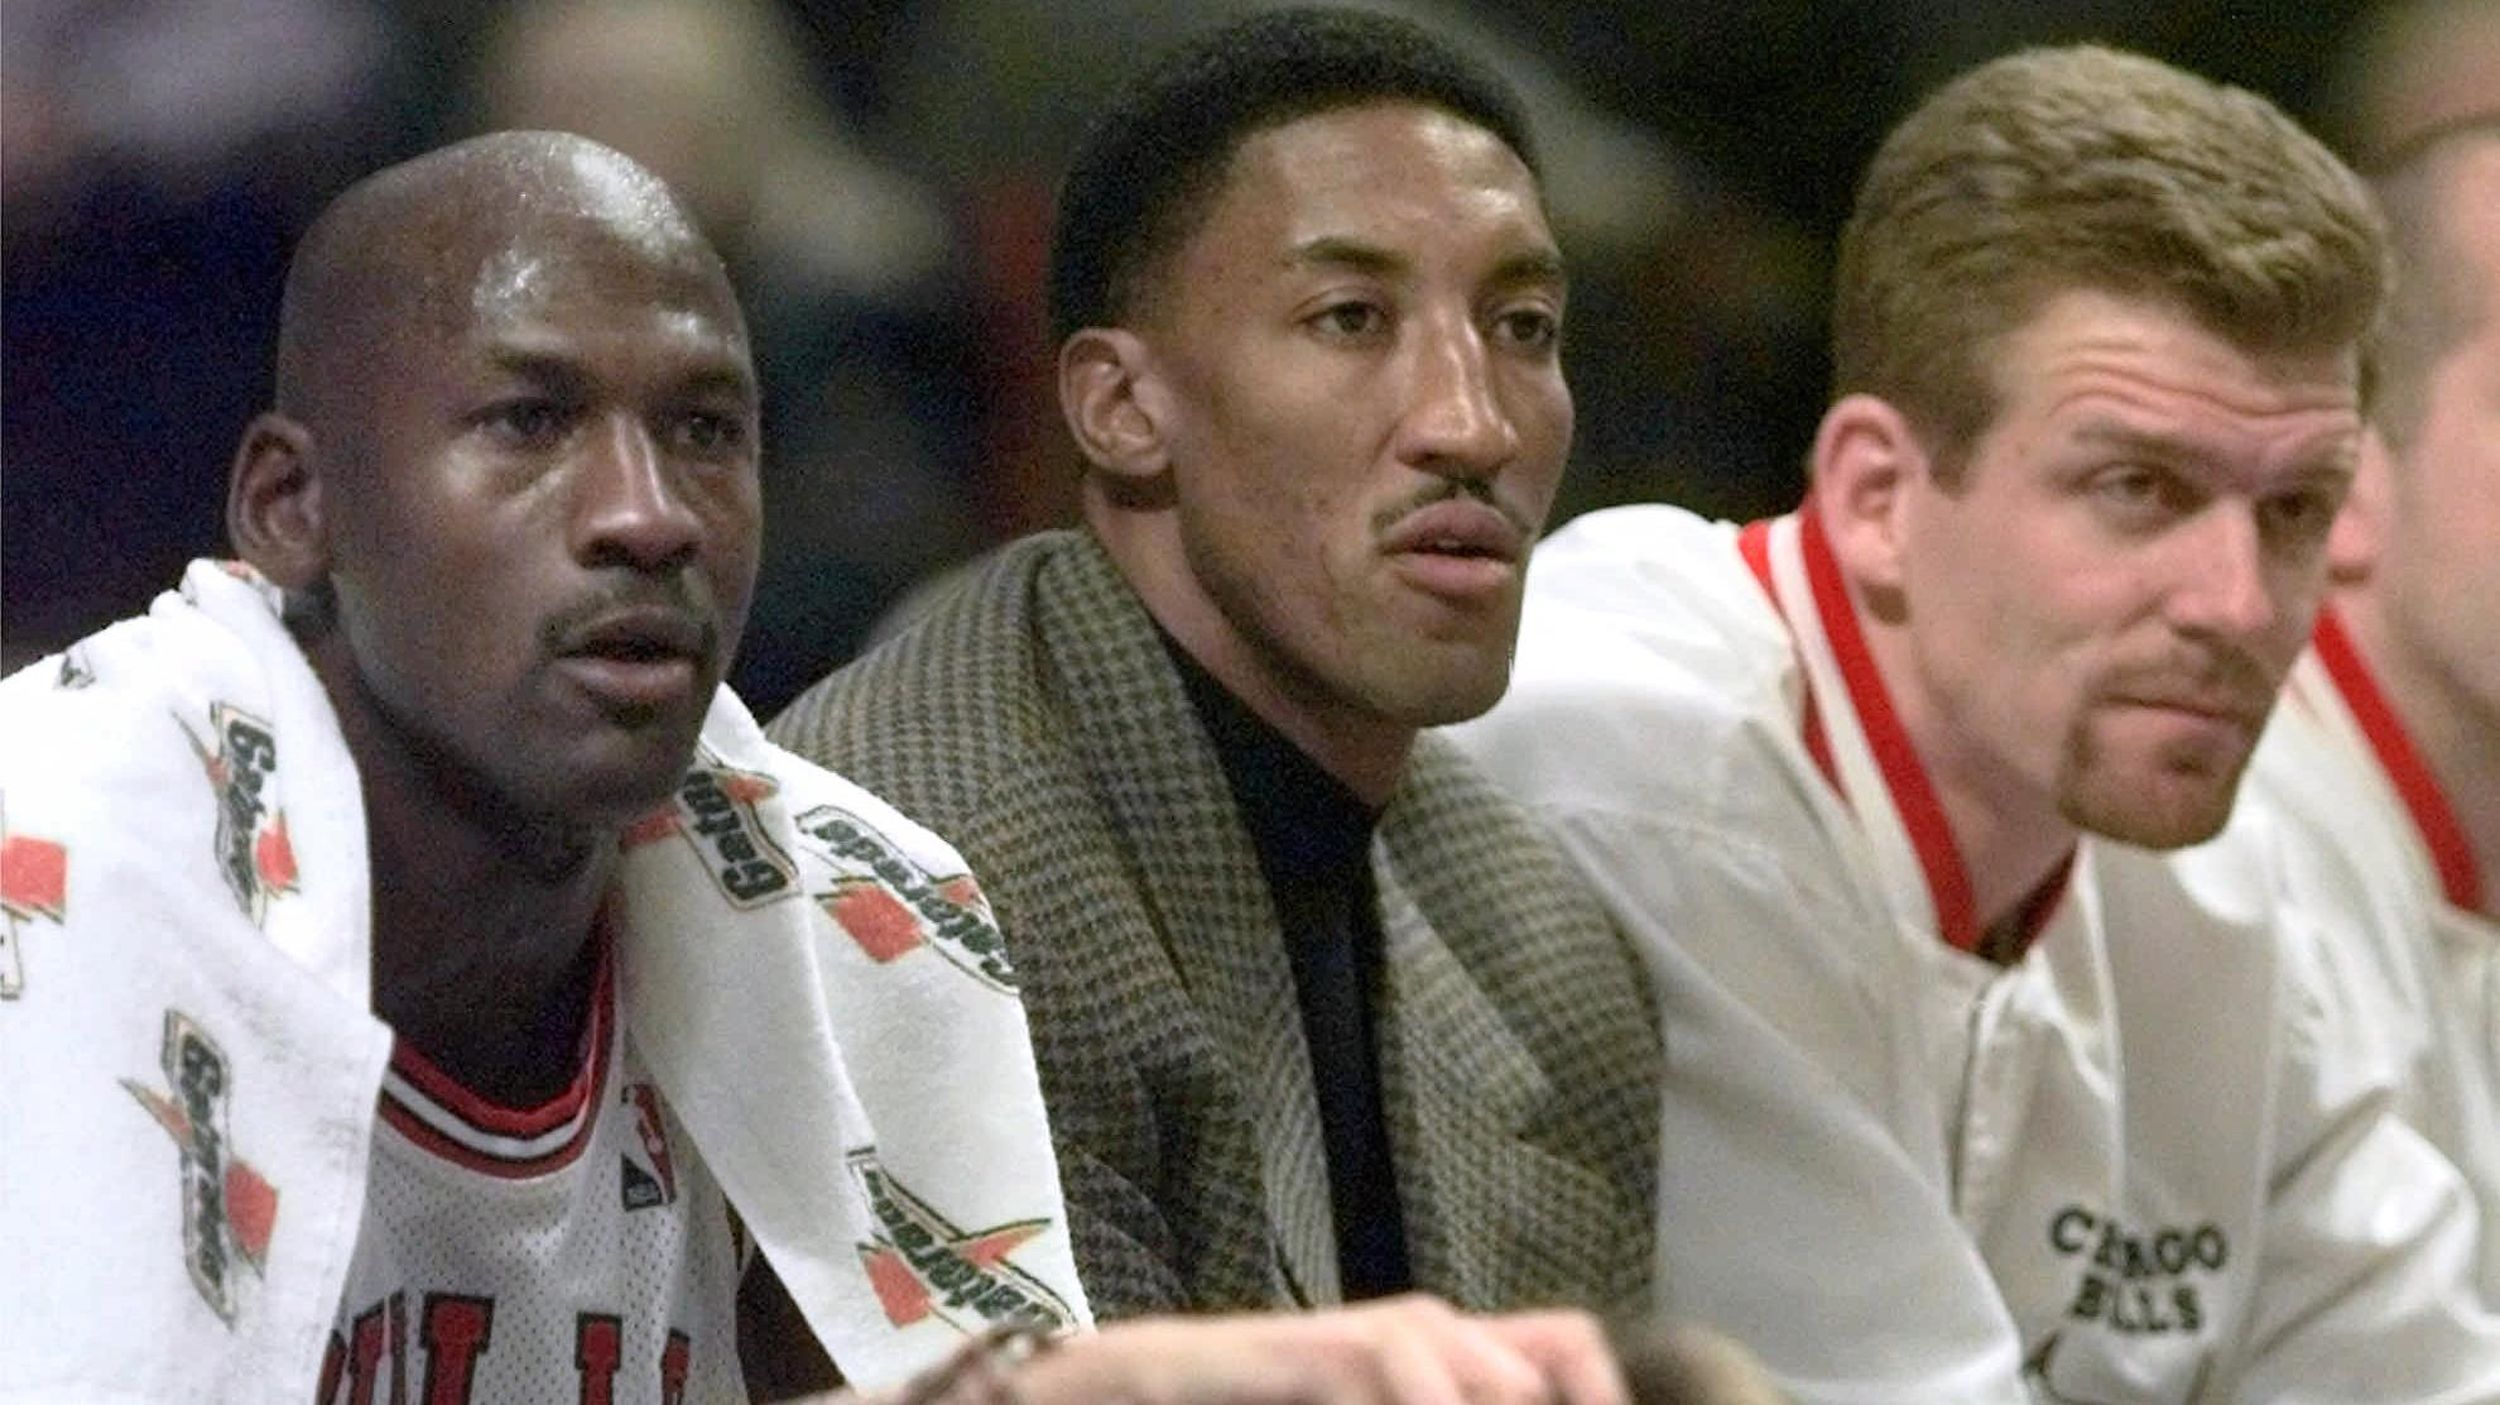 How Scottie Pippen Was Almost Traded For Shawn Kemp